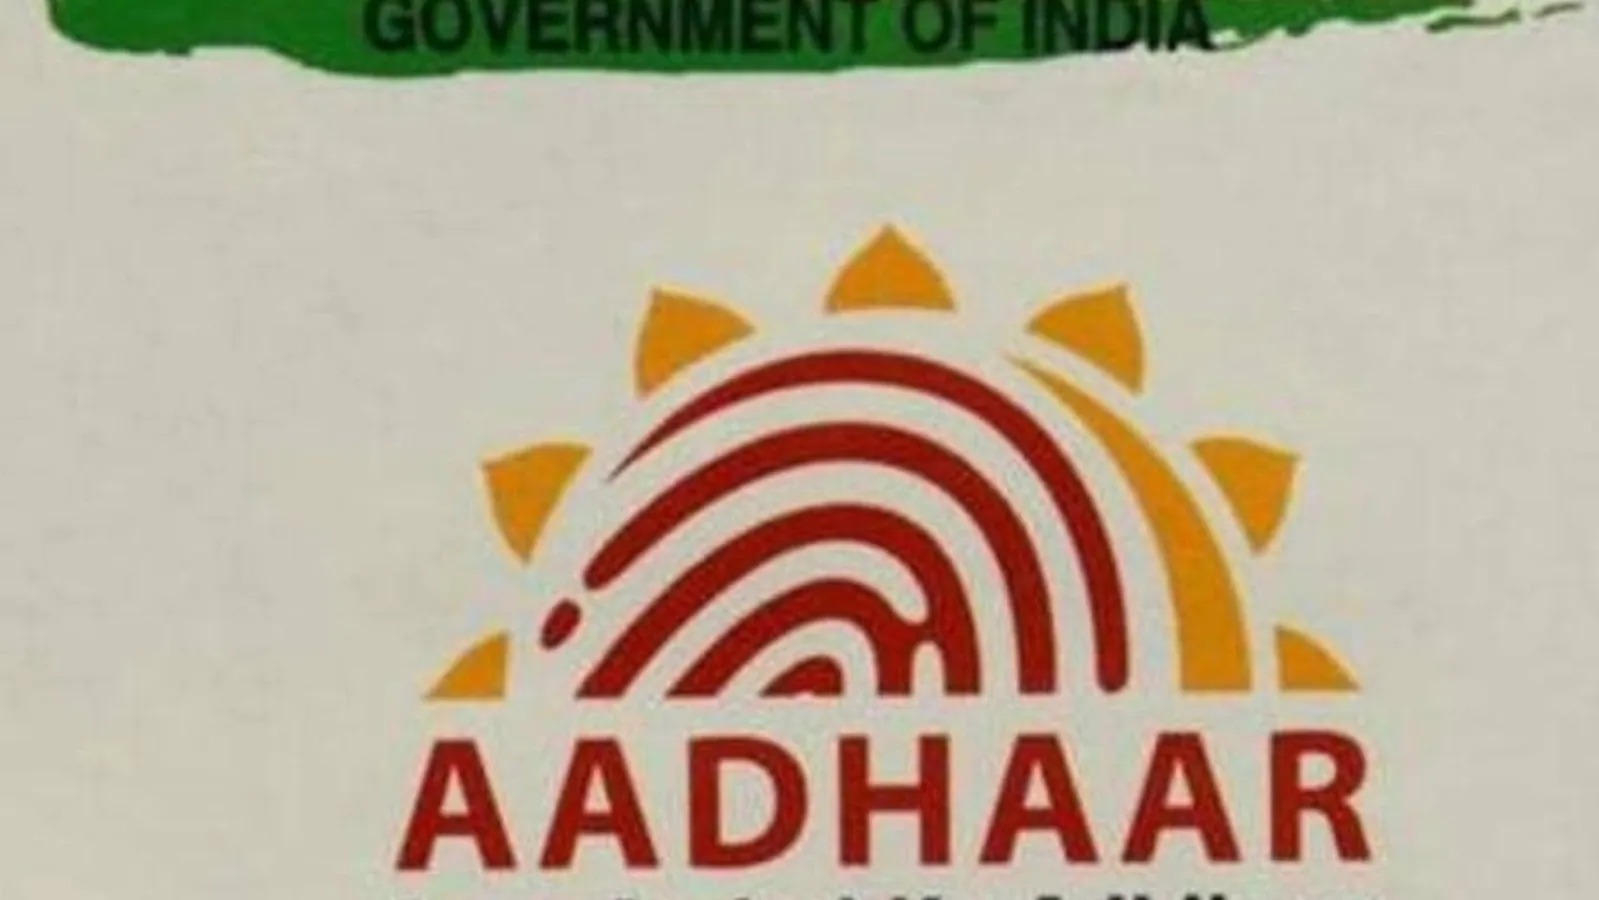 How to update mobile number on your Aadhaar card? Follow these steps